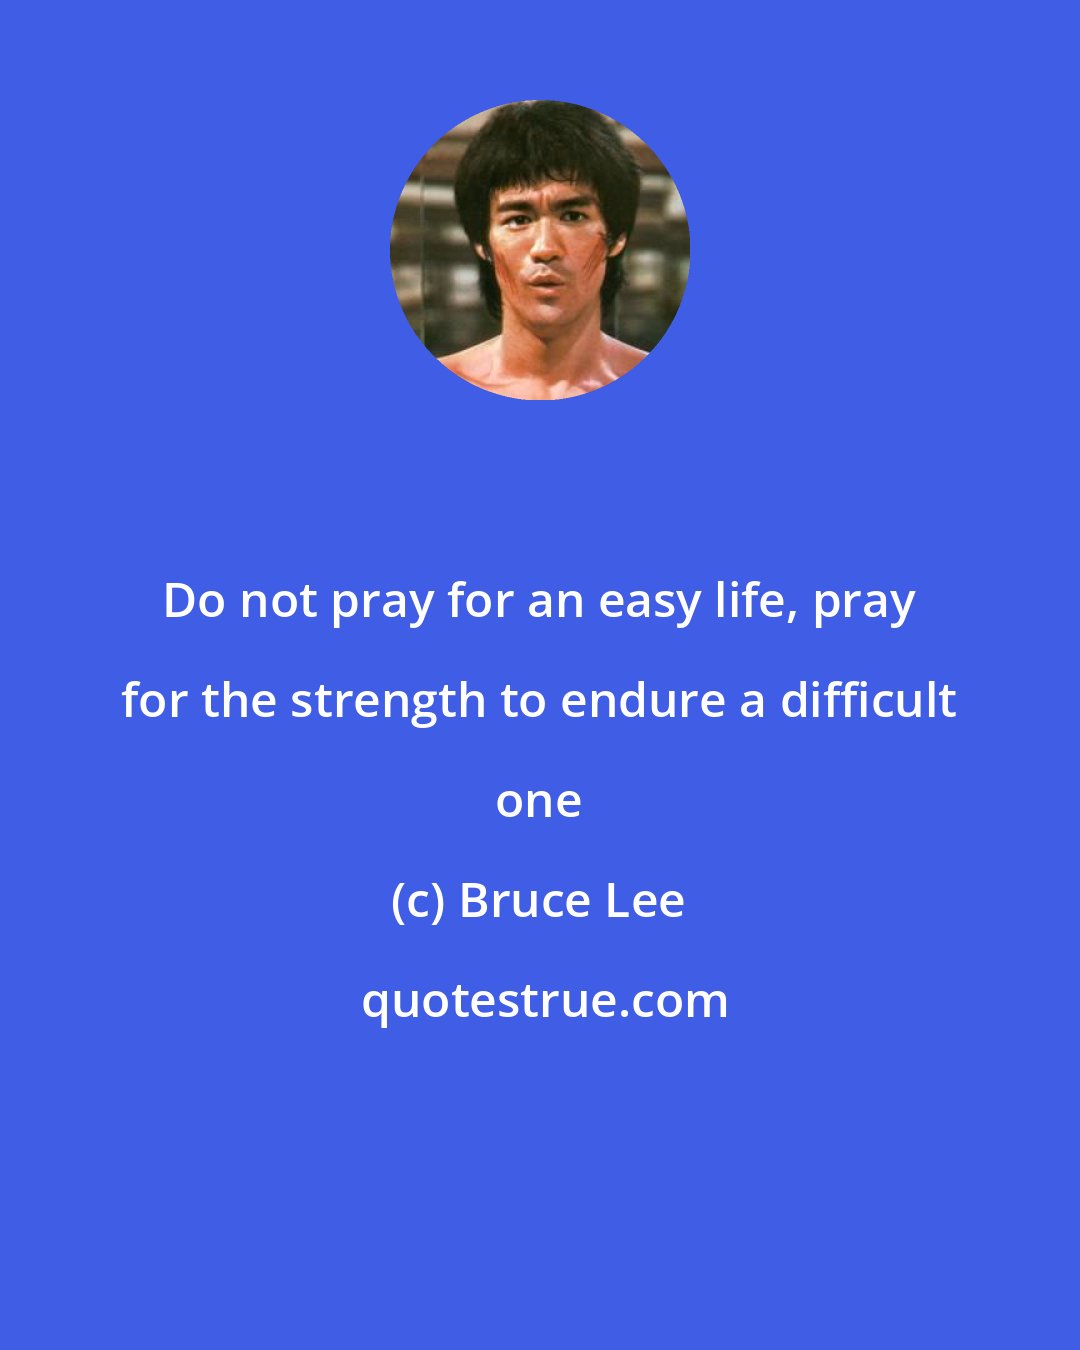 Bruce Lee: Do not pray for an easy life, pray for the strength to endure a difficult one